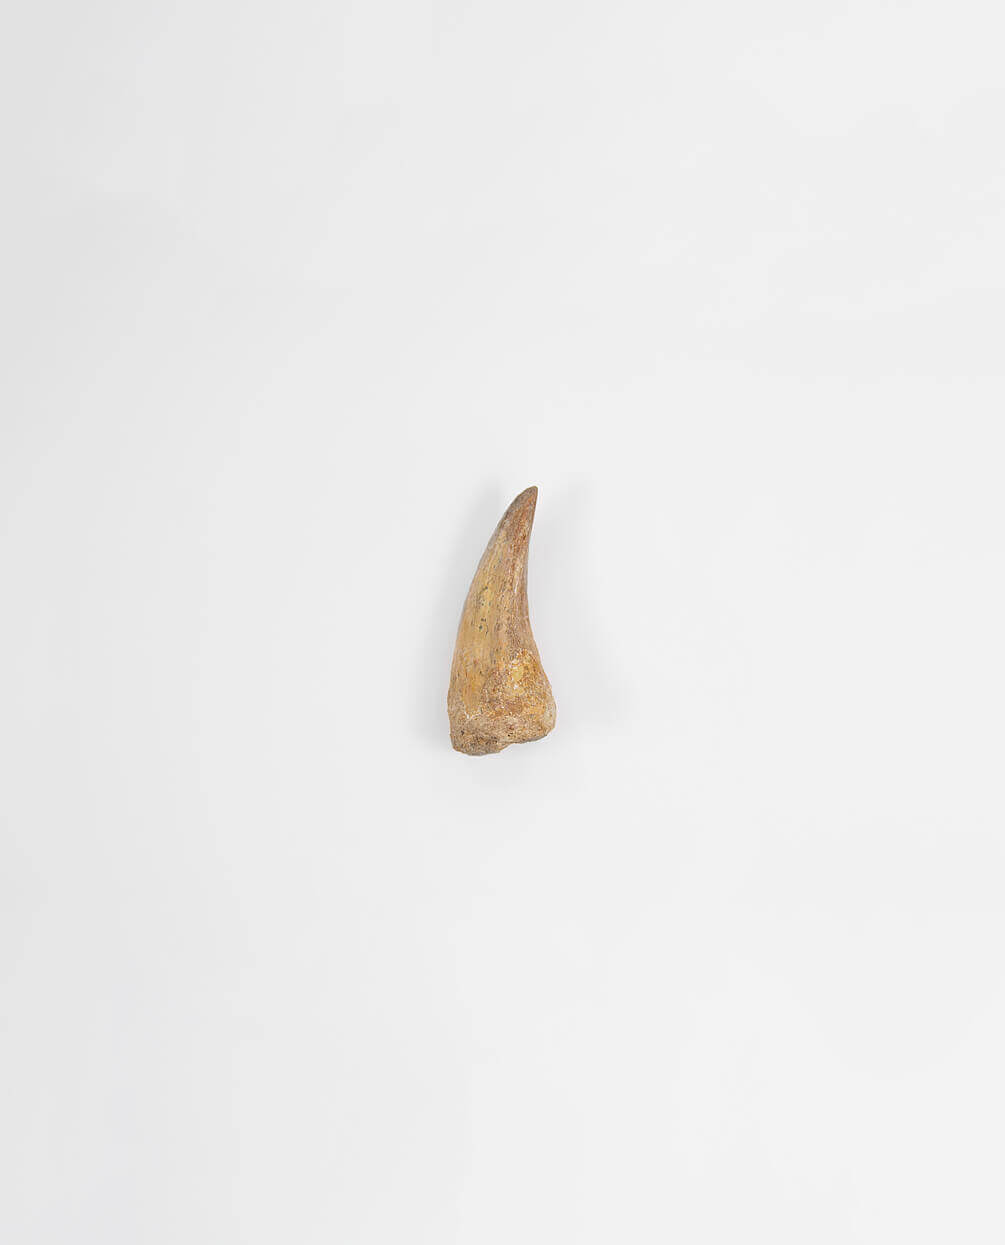 Museum-quality Carcharodontosaurus saharicus dinosaur fossil claw for sale measuring 42mm at THE FOSSIL STORE